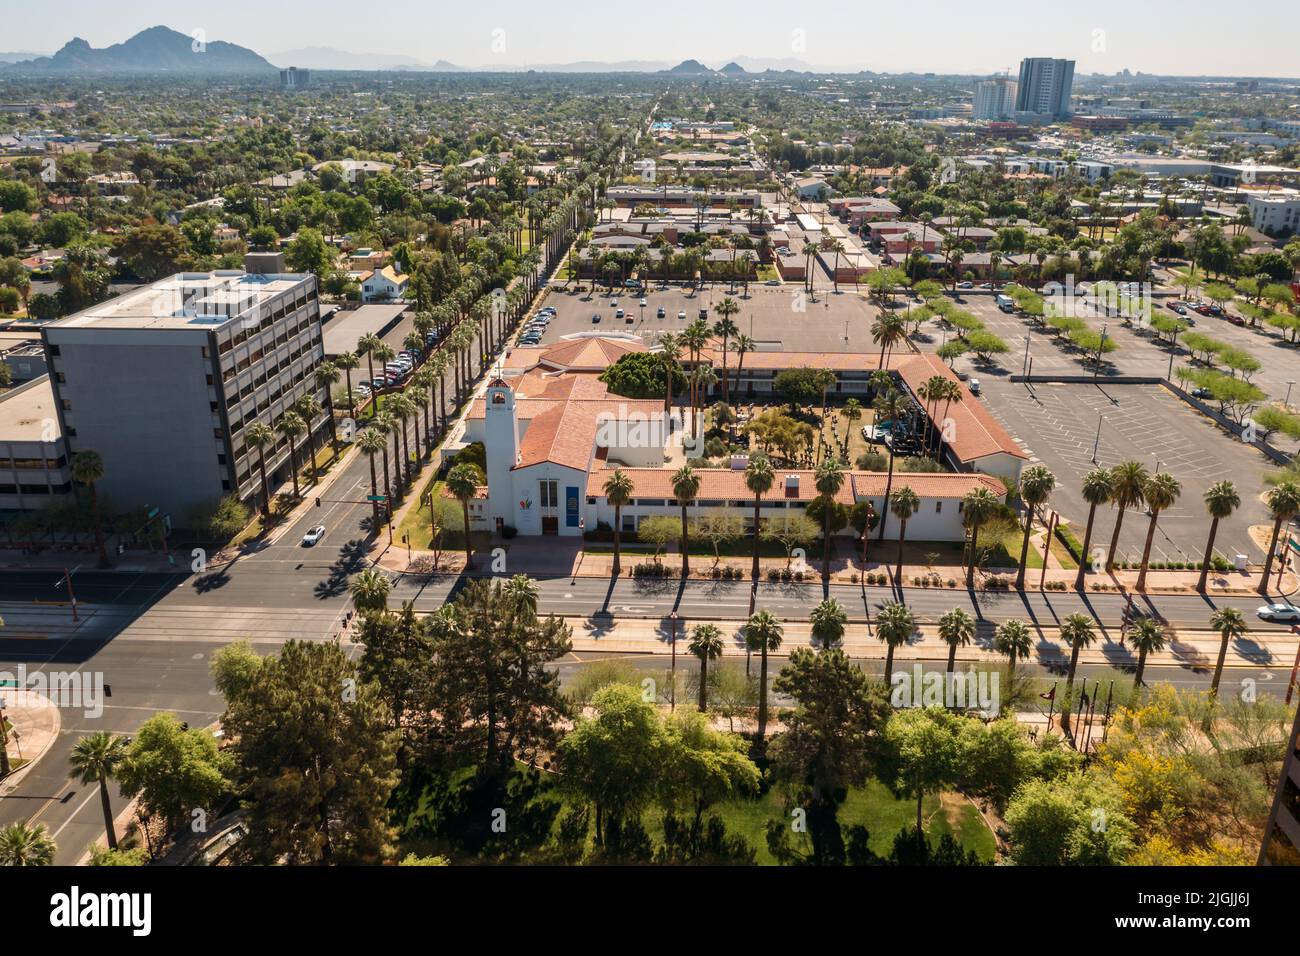 Aerial View Of Central United Methodist Church With Traffic In Foreground In Phoenix, Arizona Stock Photo